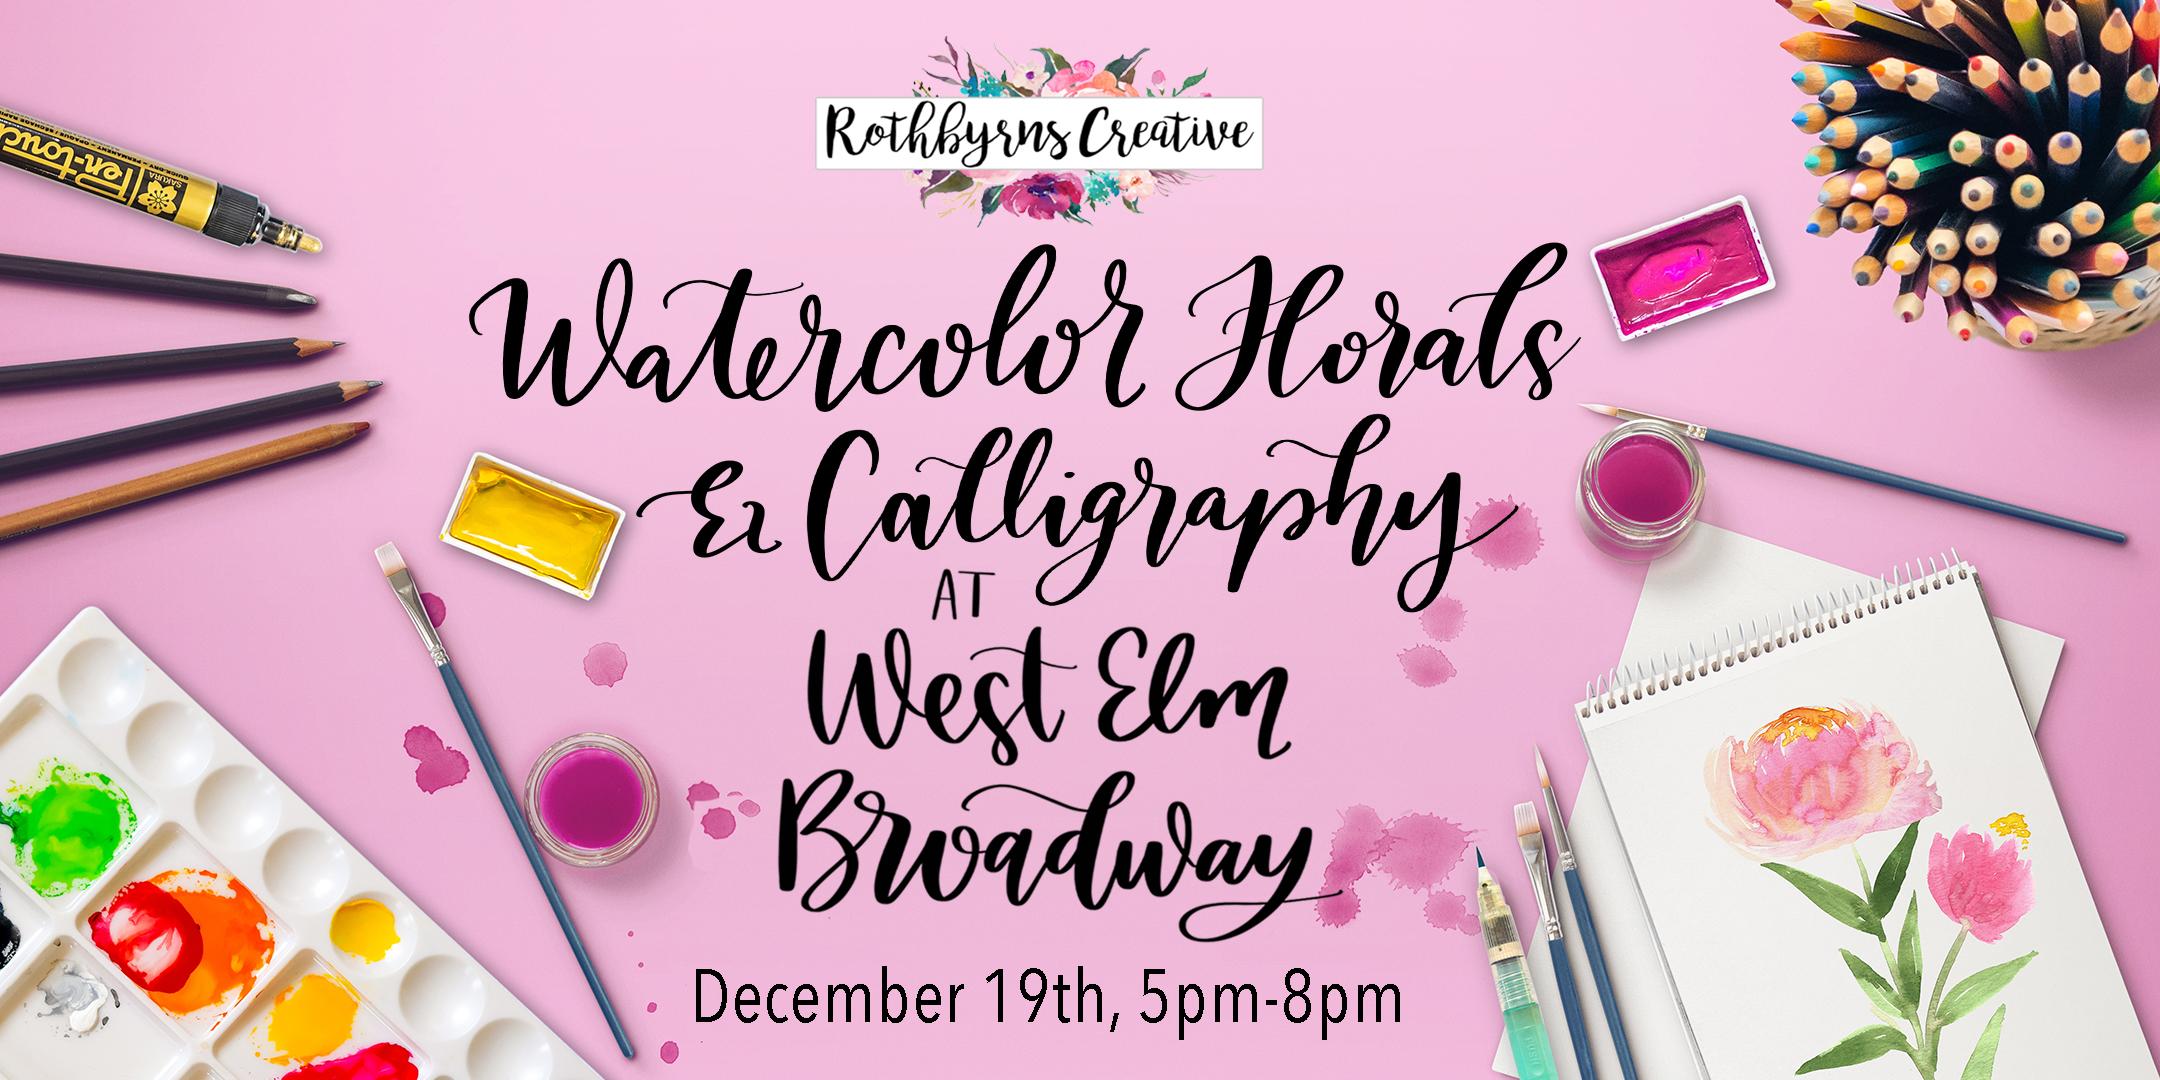 12/19 Watercolor Florals & Calligraphy at West Elm Broadway